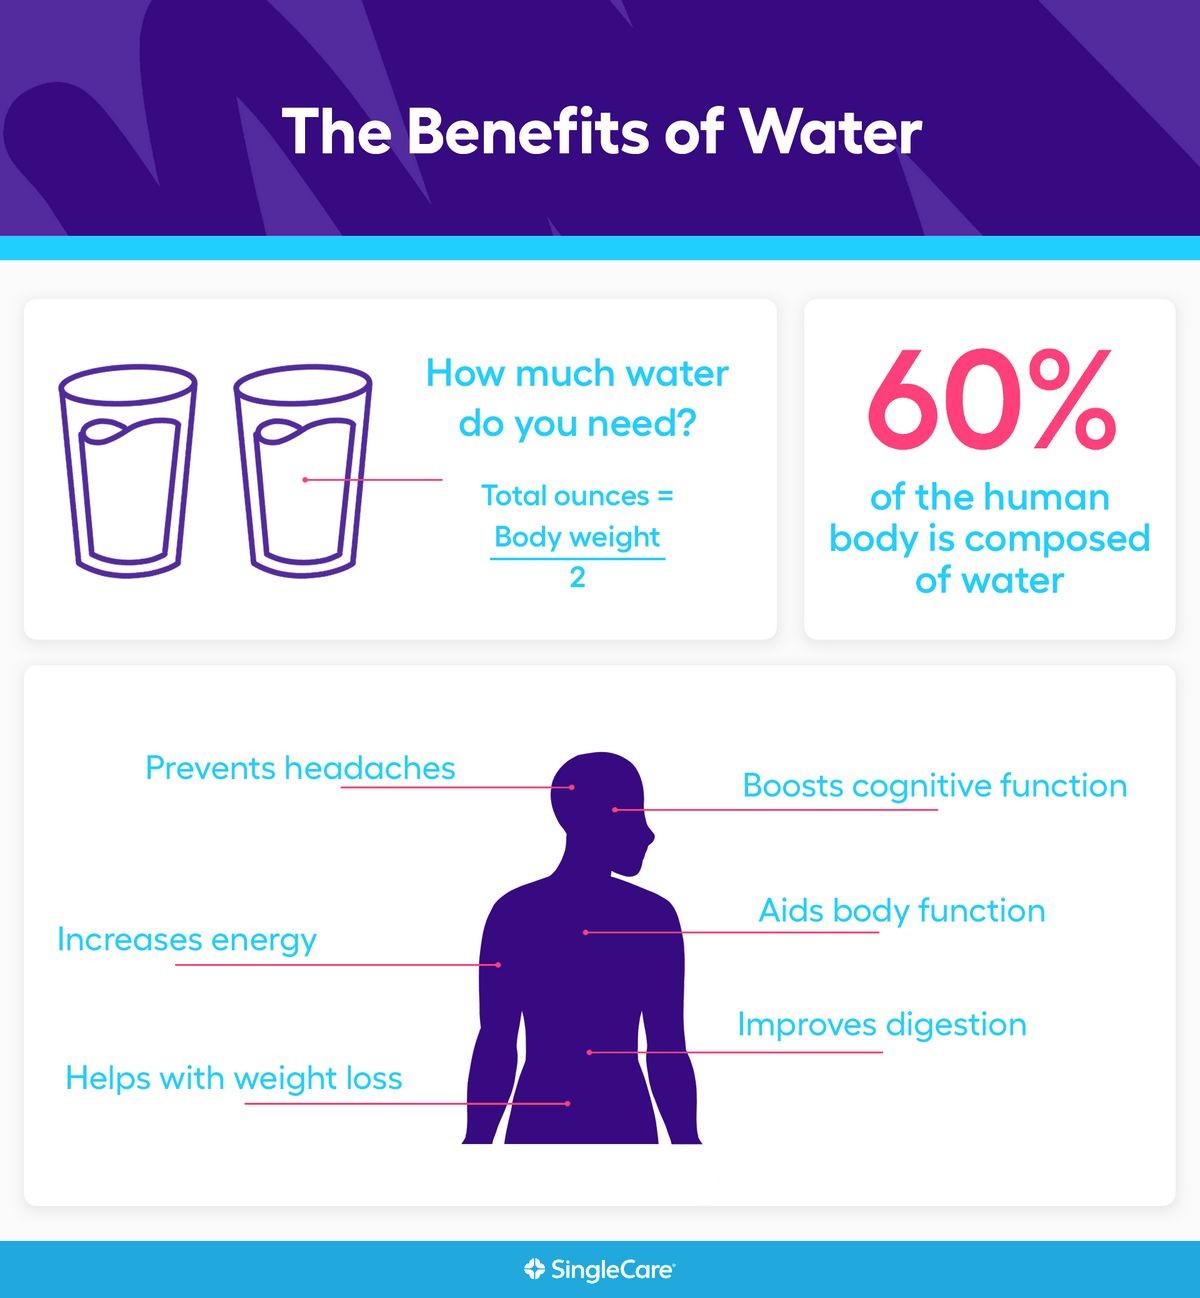 Does Drinking Flavored Water Give You the Same Health Benefits as Drinking Plain Water